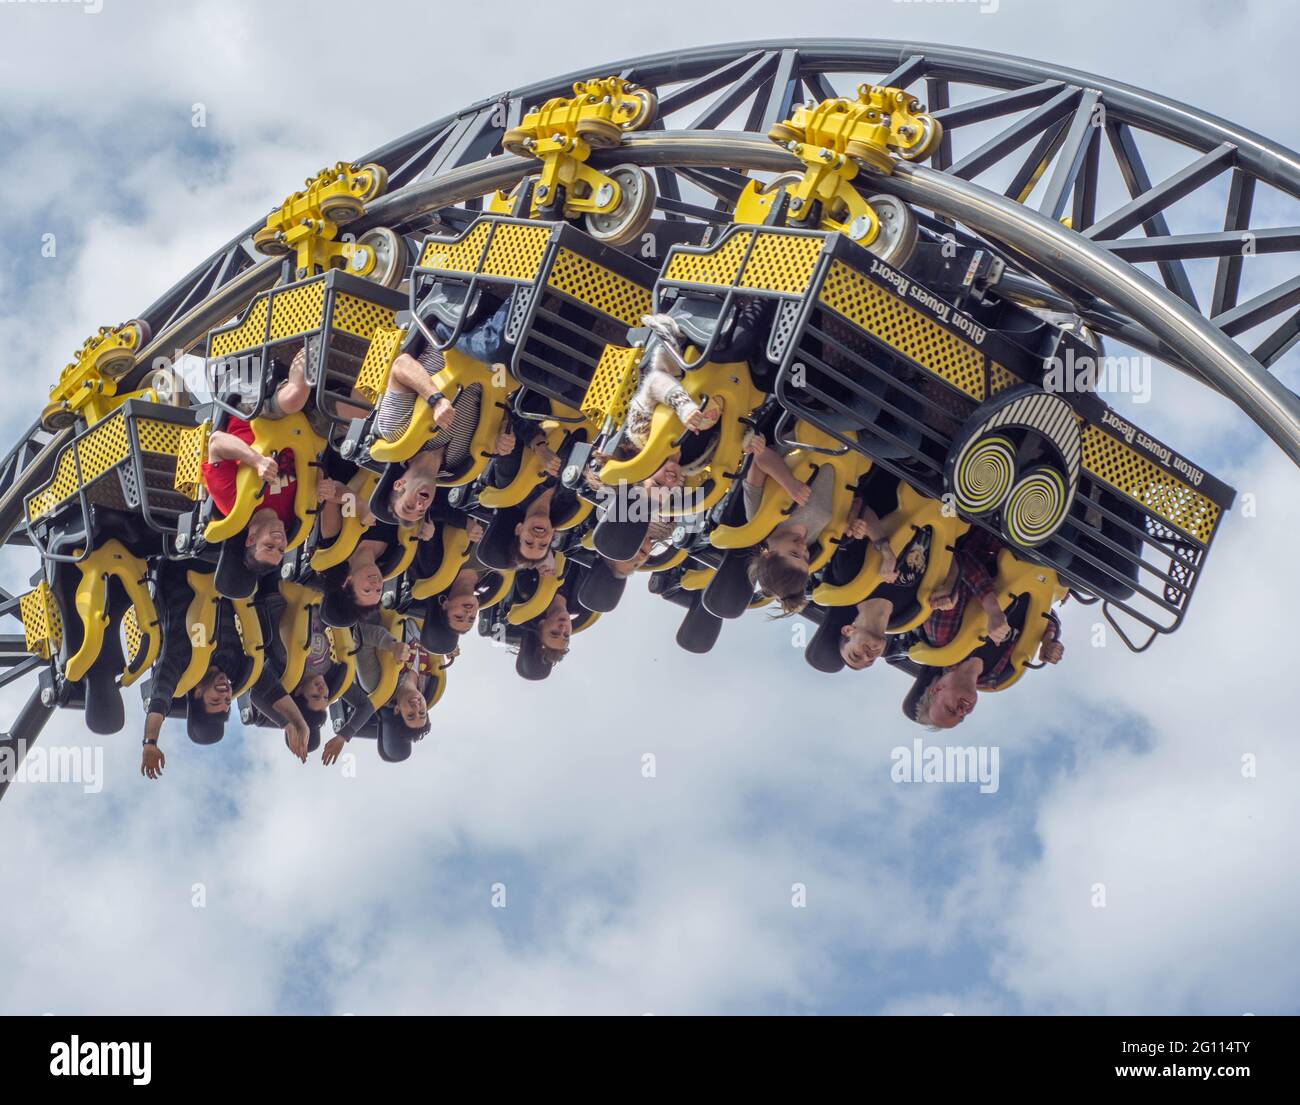 The World Record Breaking Rollercoaster , The Smiler at Alton Towers, Will Turn you upside down a record 14 Times per ride ! Stock Photo